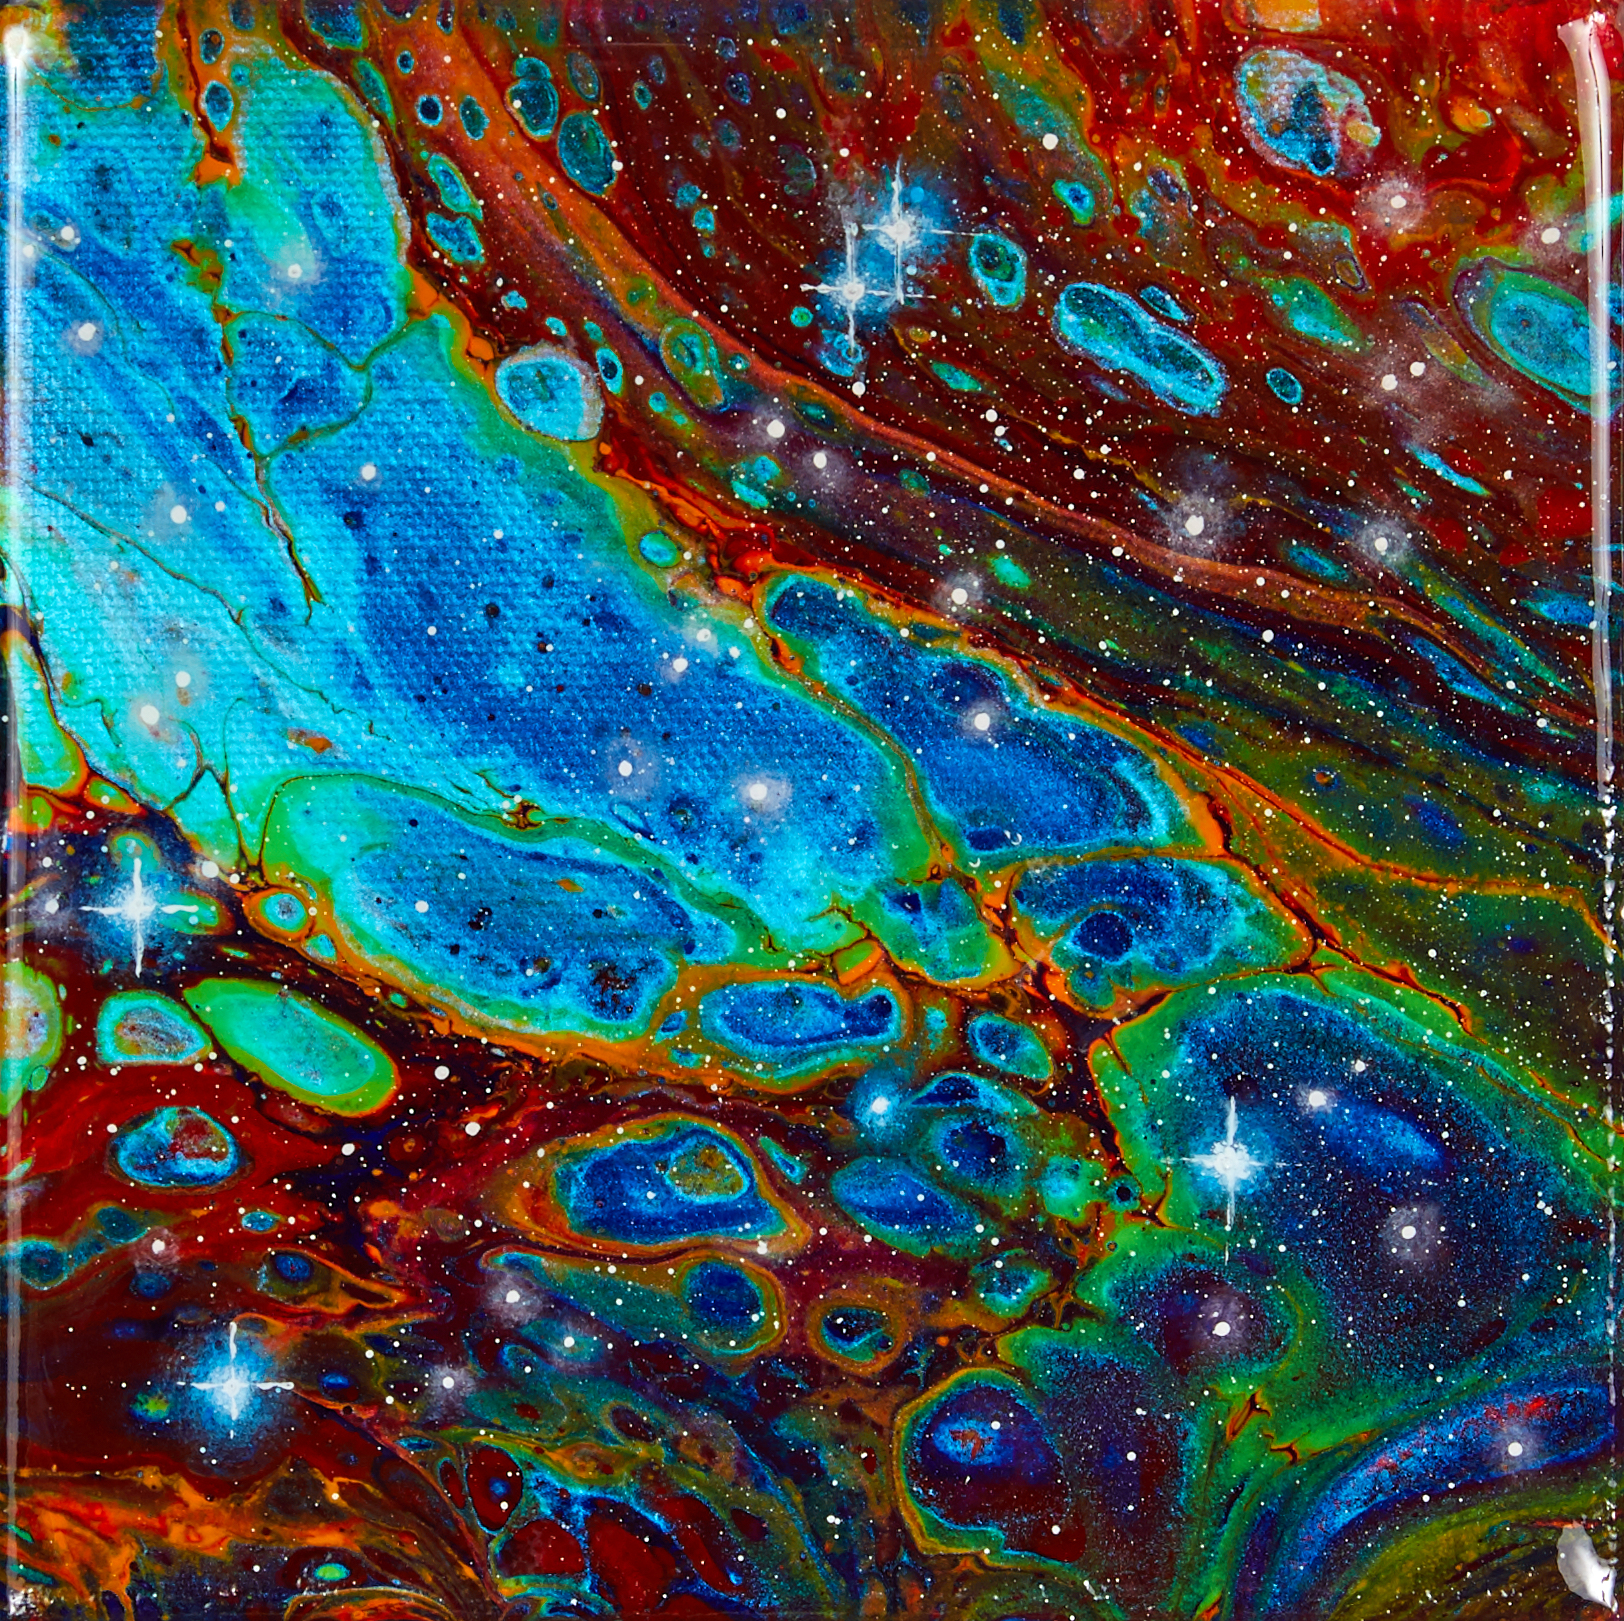 Mixed media on canvas. 6x6 inches